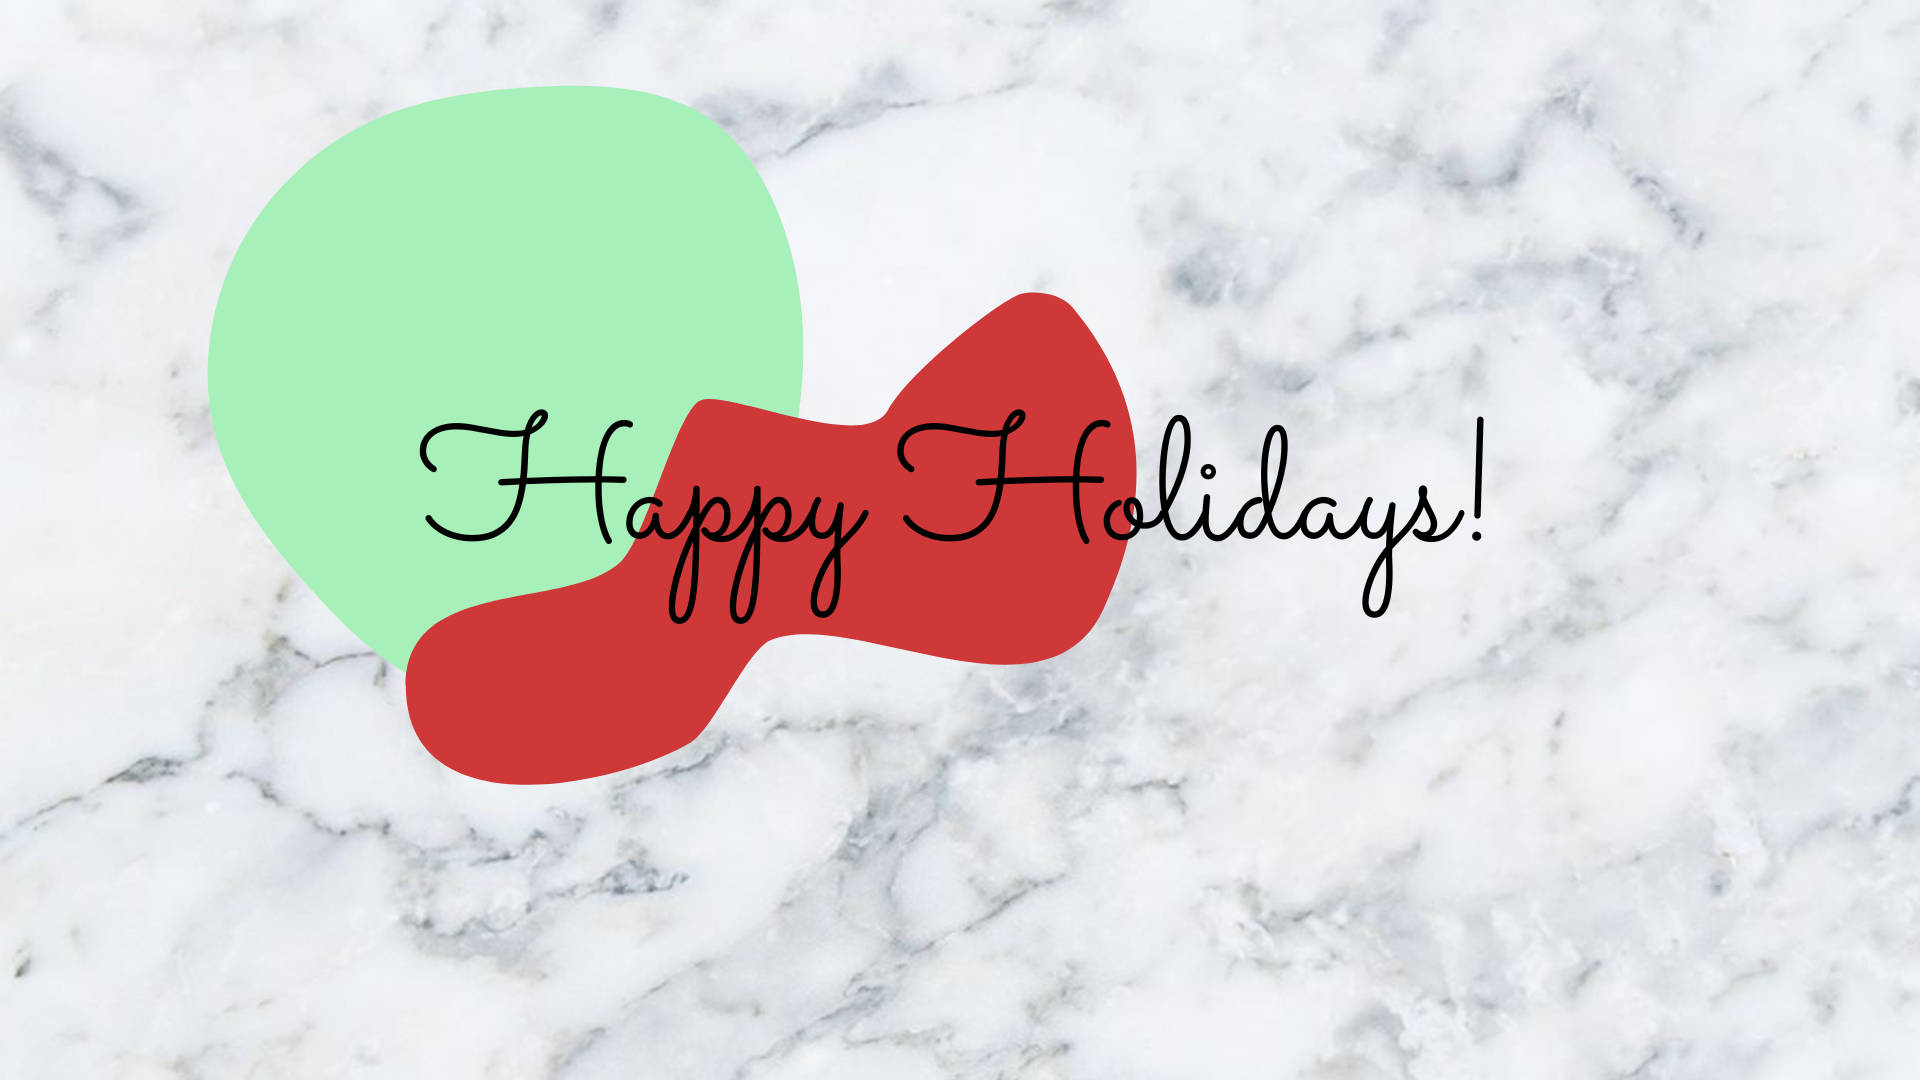 Holiday Greetings On White Marble Wallpaper